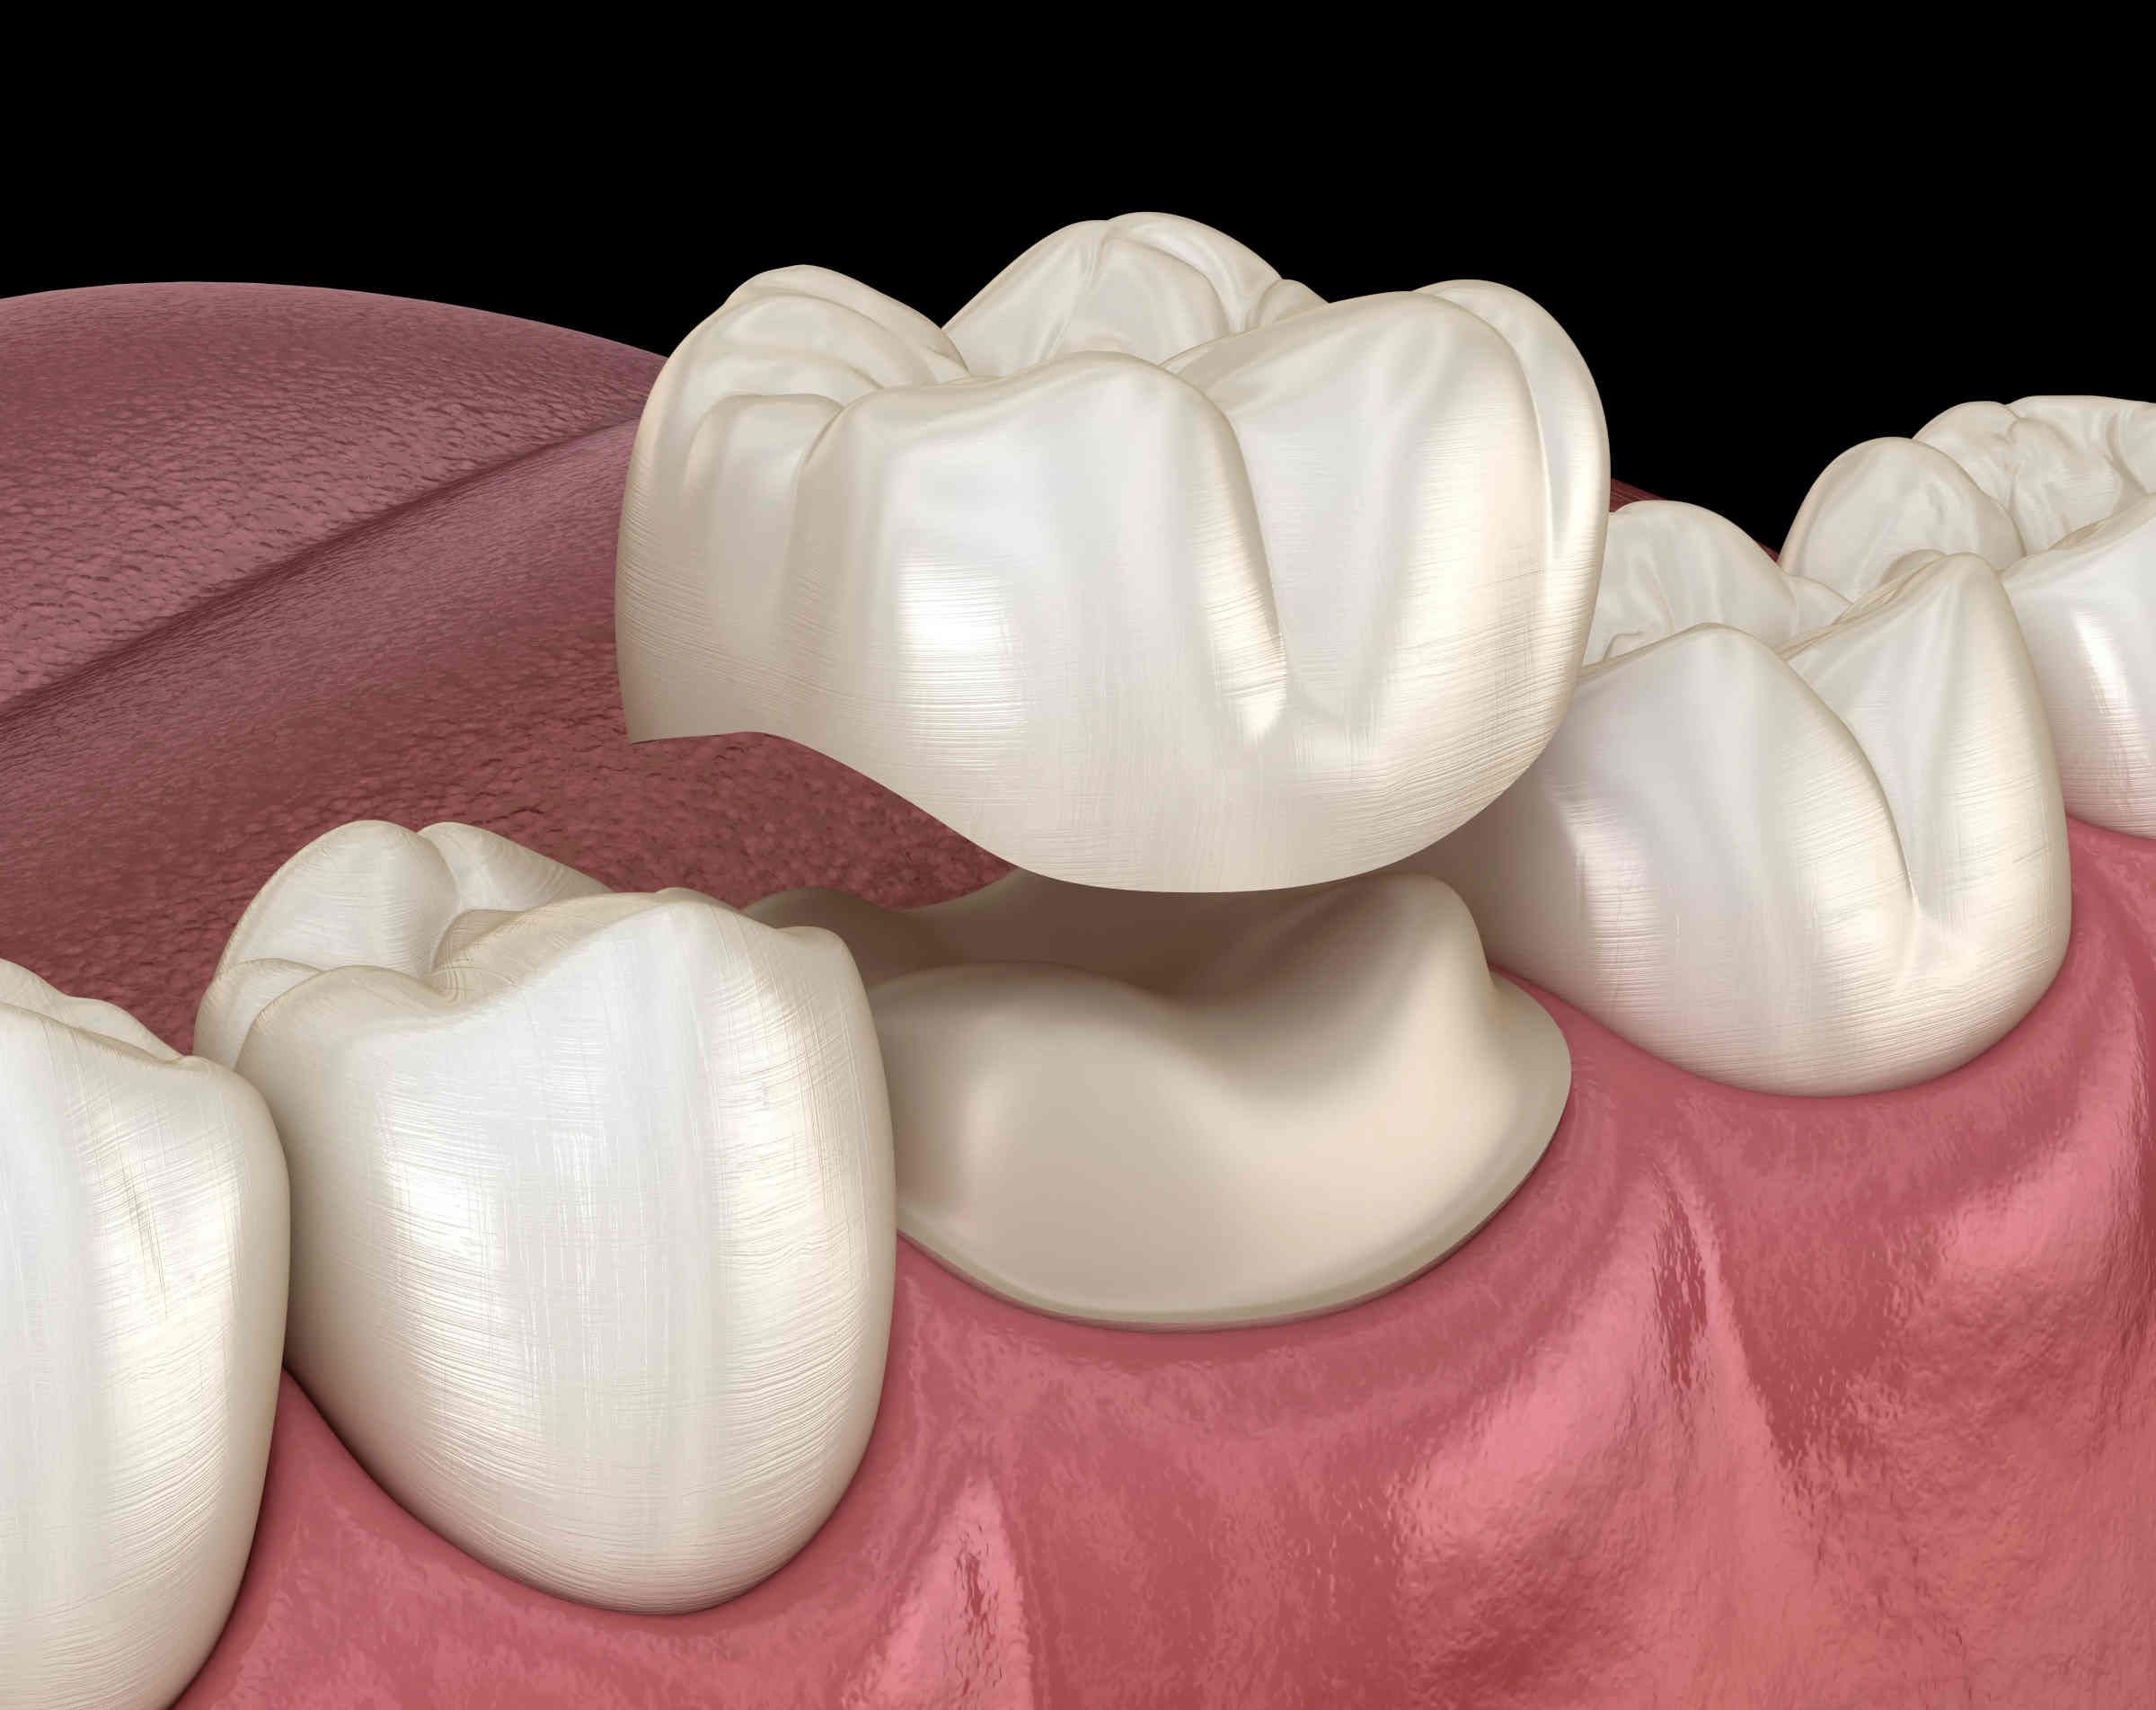 Zirconia crowns have quickly become the most popular choice of dental work. Here's why more and more people are making it their main form of tooth care!